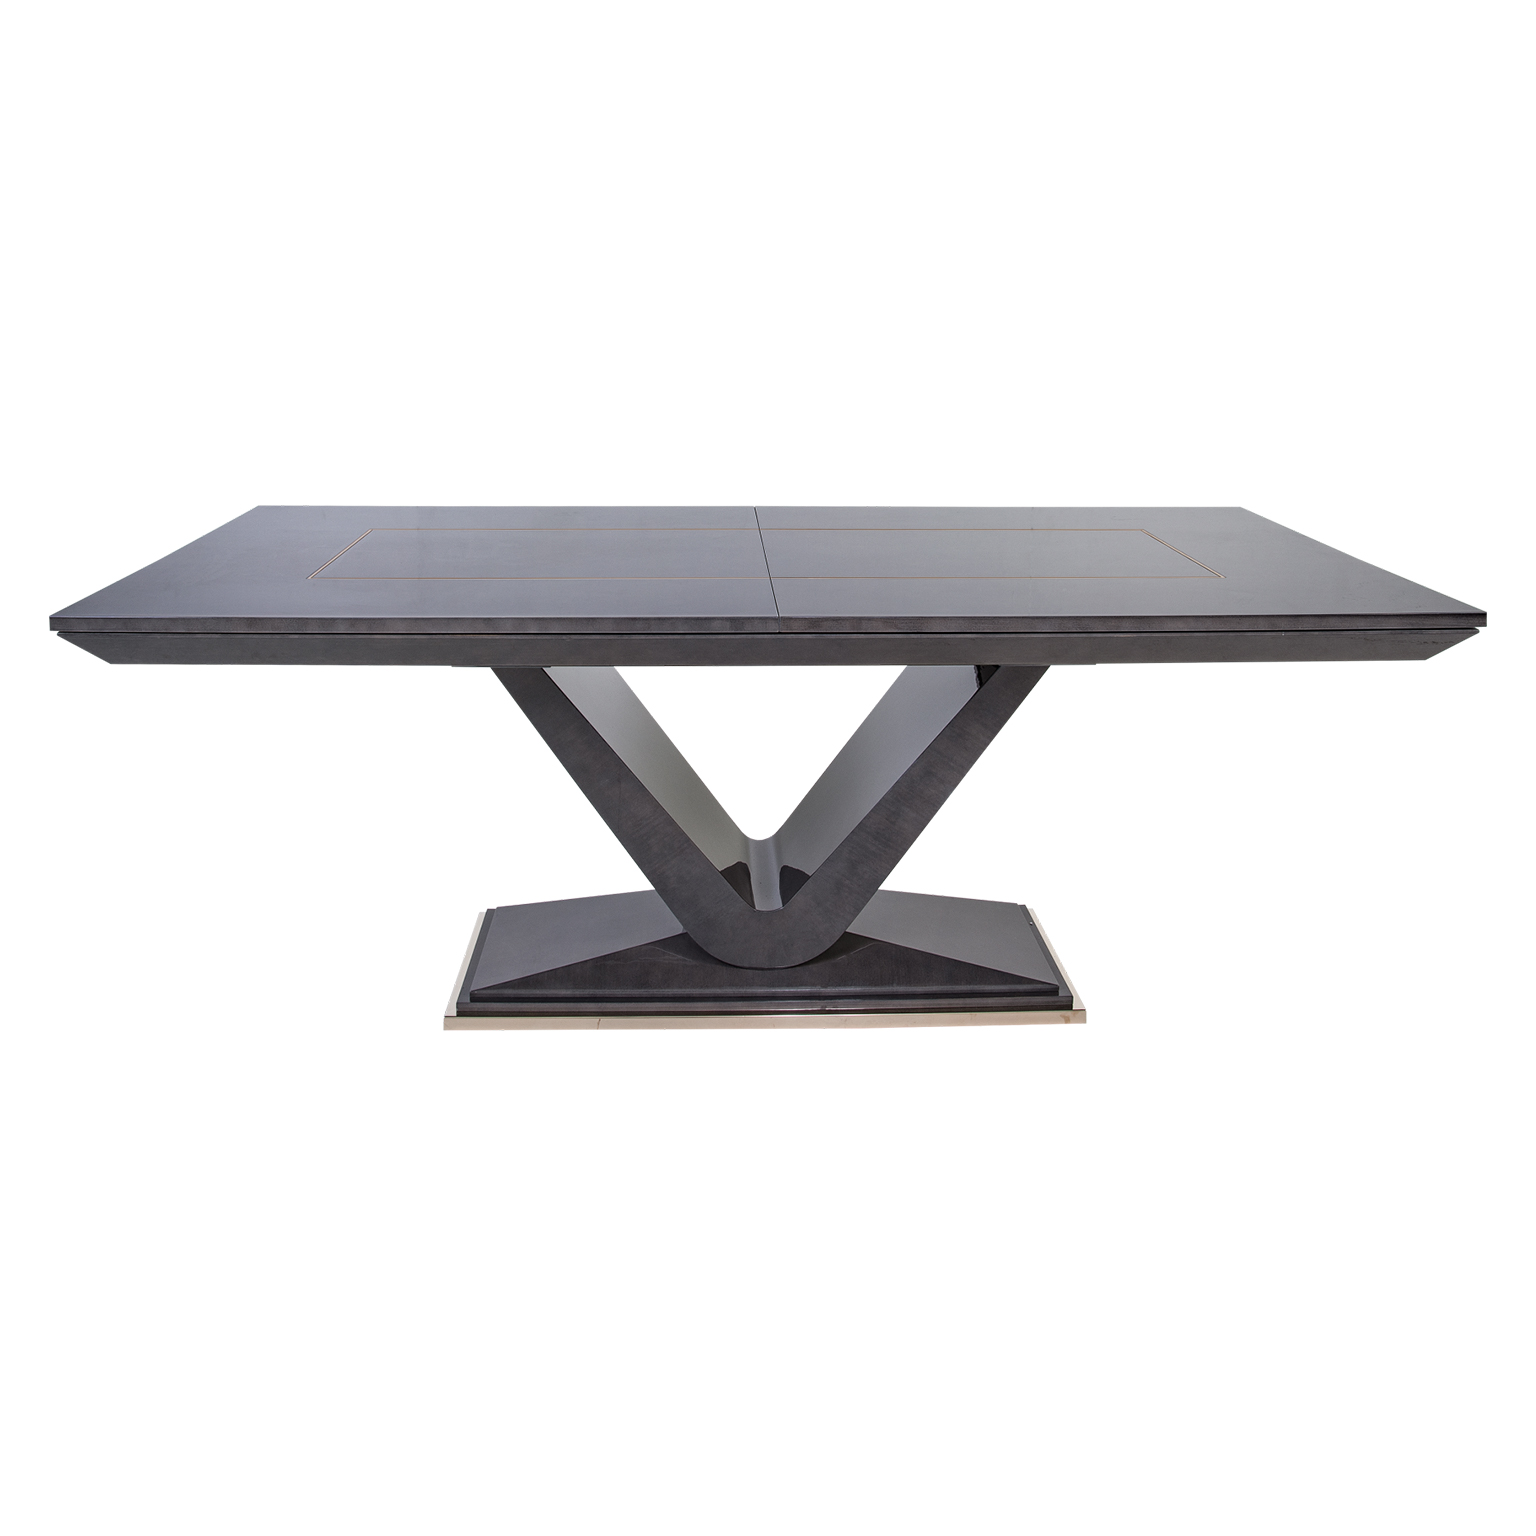 Modern Dining in dark grey high gloss lacquer with "v" shape stand